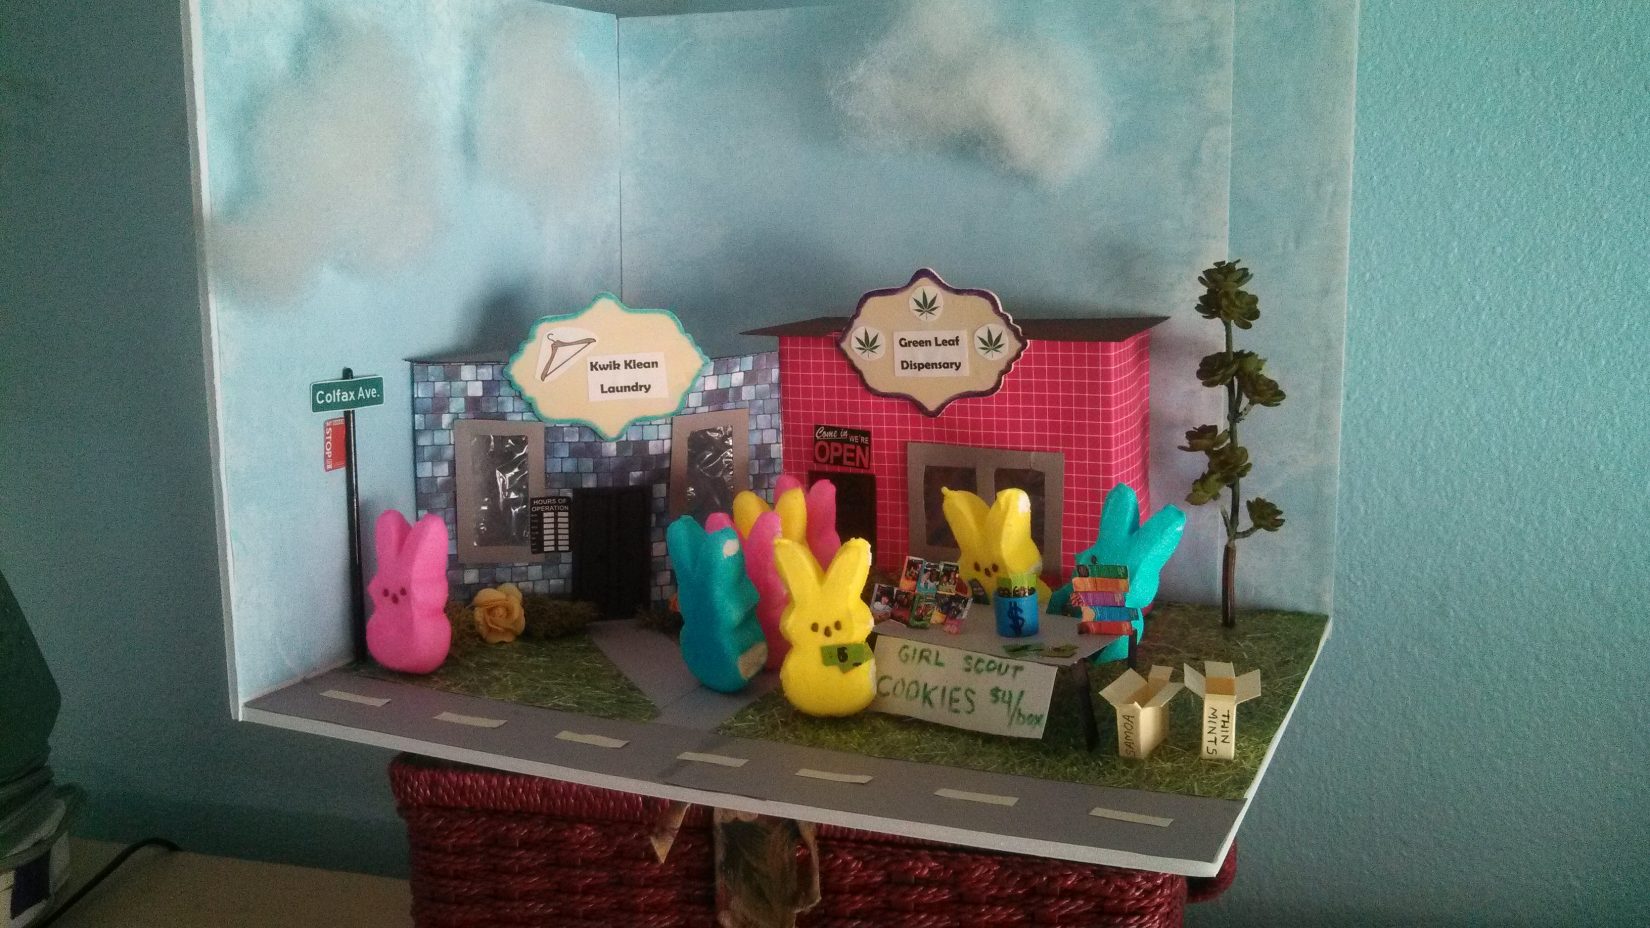 One of the best weed-themed entries in The Denver Post's annual Peeps diorama contest is "Peep Scout Entrepreneurs," by Clare Lumley of Littleton. Winners will be announced April 16 in The Post's Food section. (Clare Lumley)